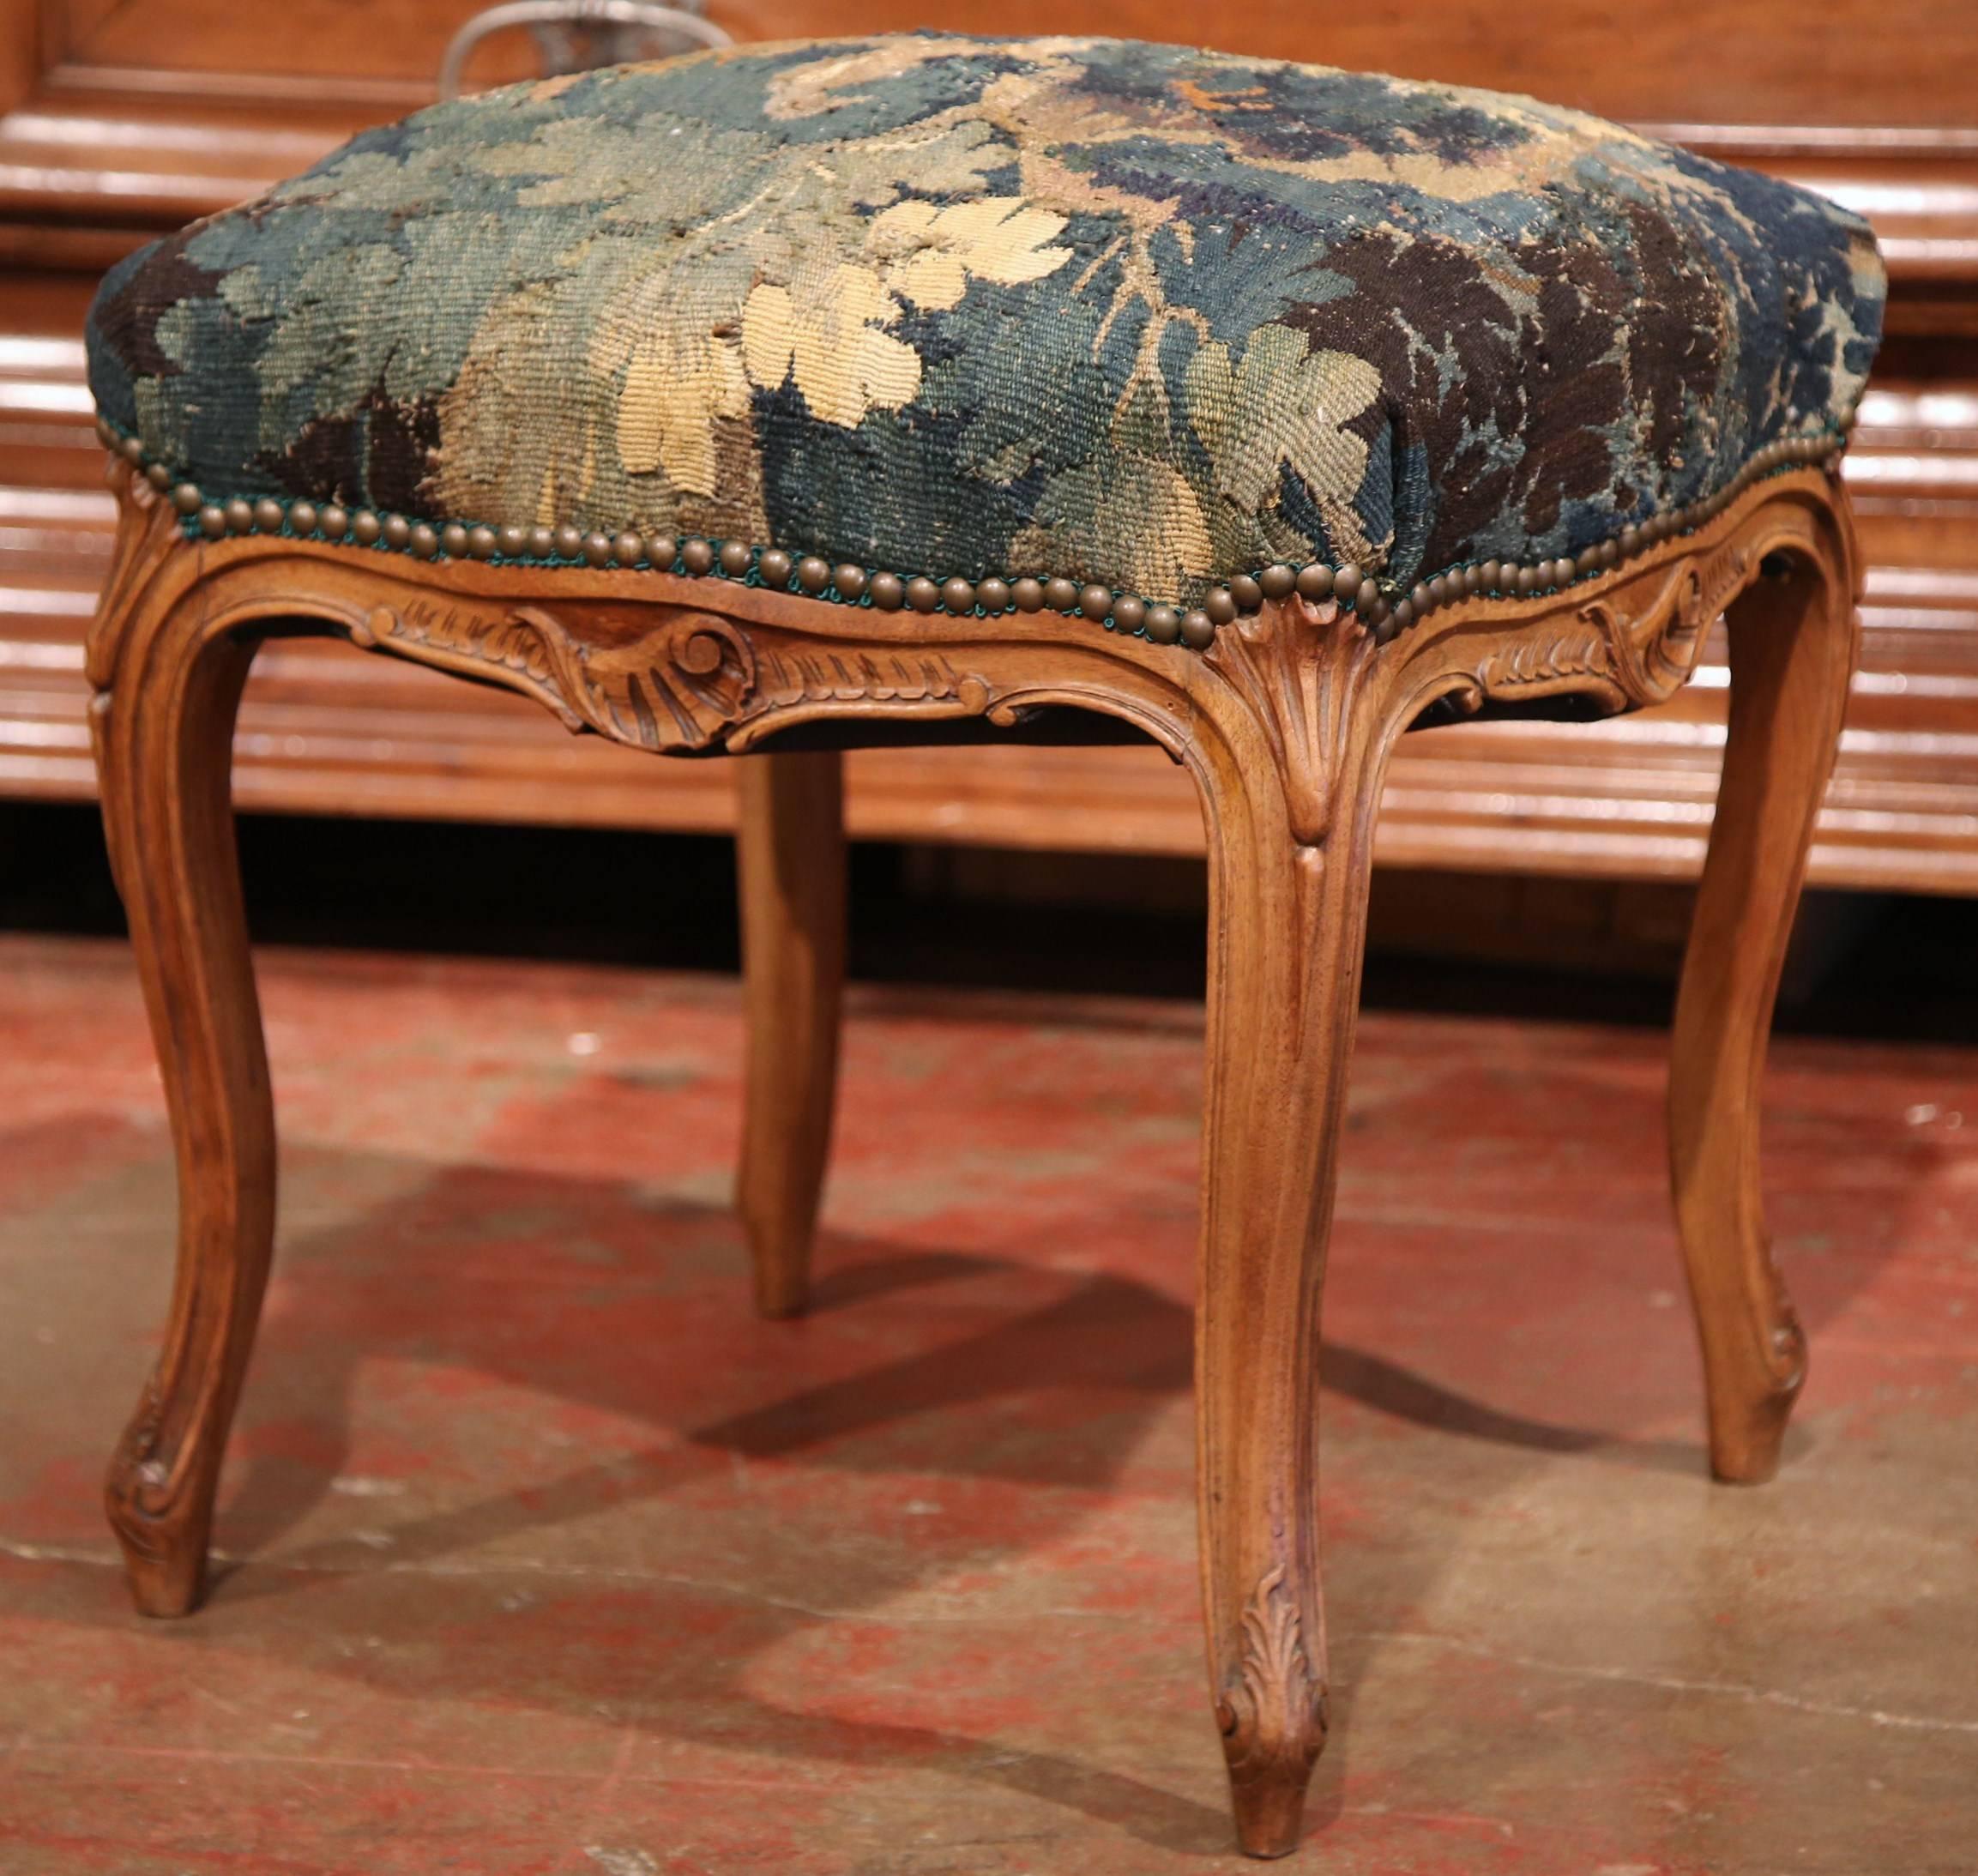 This elegant, carved fruitwood stool was crafted in Provence, France, circa 1890. The square stool has four cabriole legs and a wooden frame embellished with detailed leaves and shells carvings. The stool cushion has been reupholstered with an